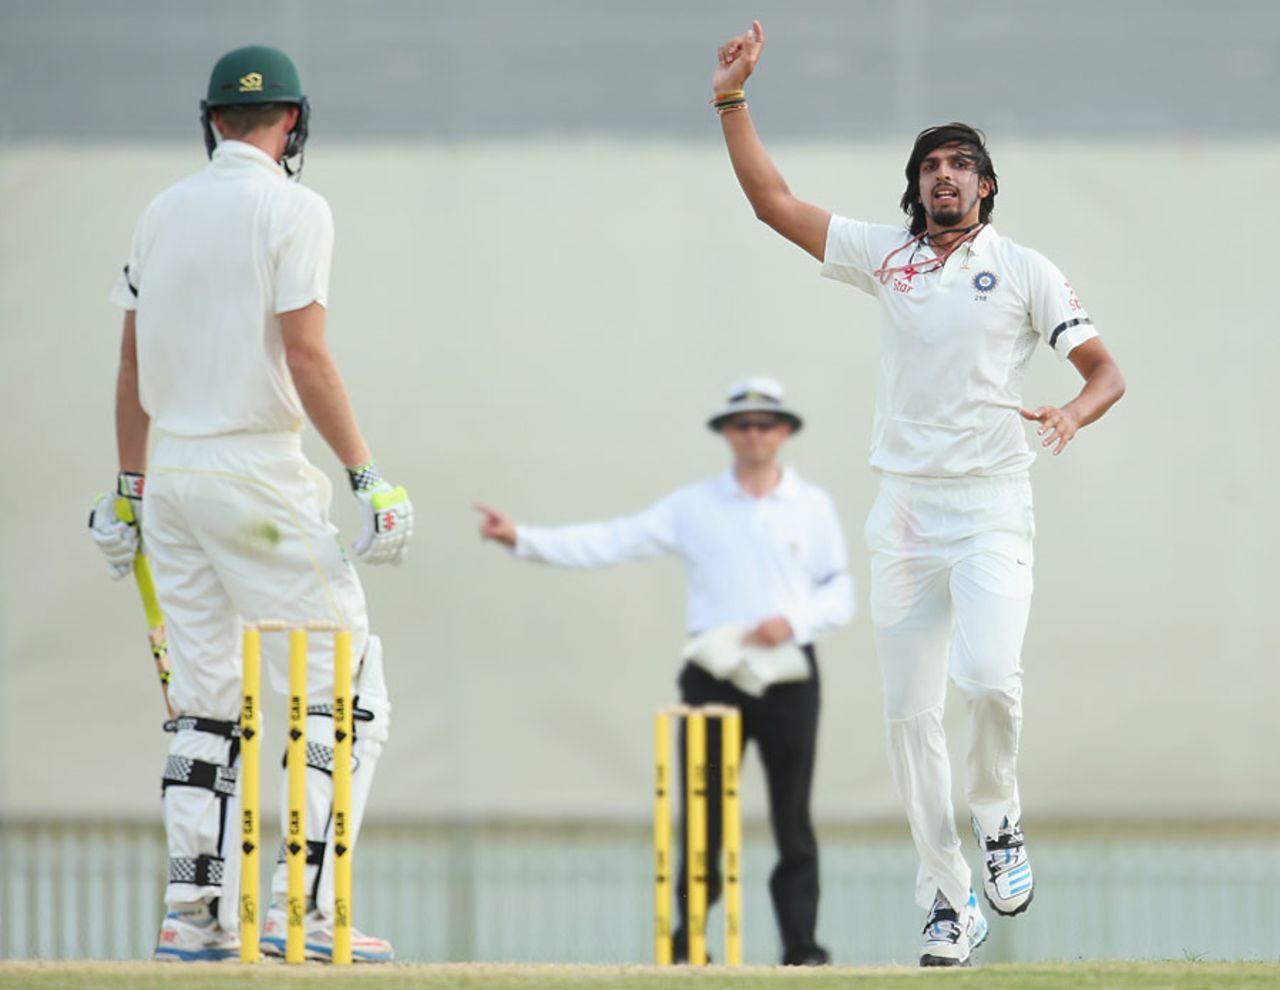 Another no-ball? In fact, the umpire is raising his finger to give Ishant Sharma the wicket of Alex Keath, Cricket Australia XI v Indians, Tour match, Adelaide, 2nd day, December 5, 2014